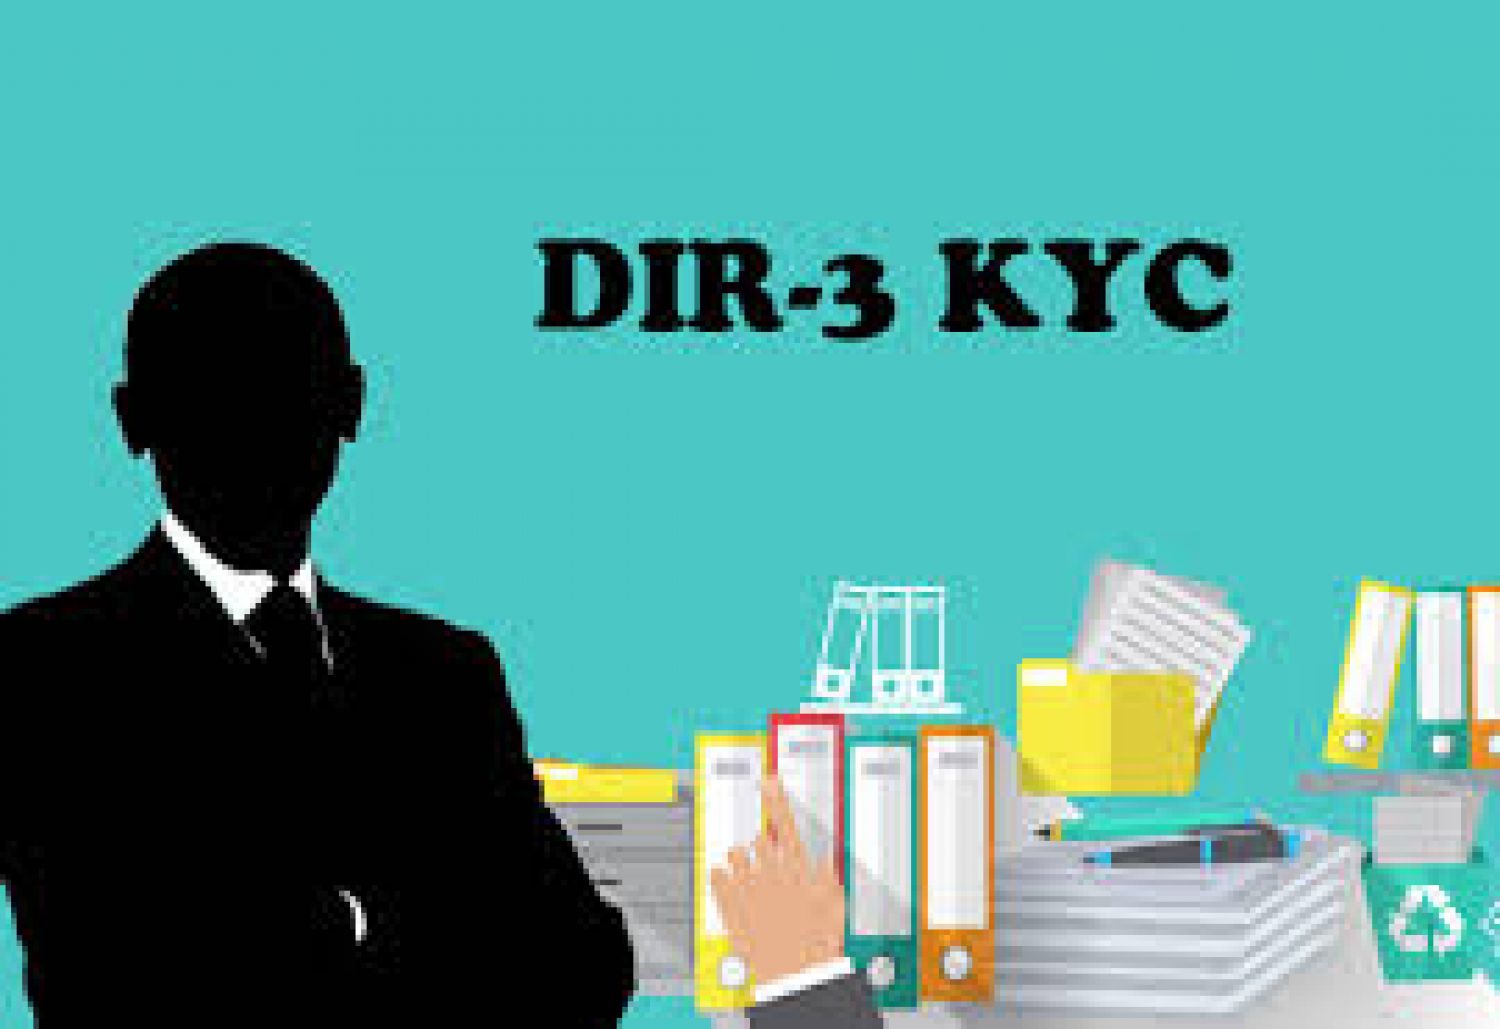 ARE YOU A DIRECTOR?-THEN YOU HAVE TO FILE E-KYC DIR-3 FORM